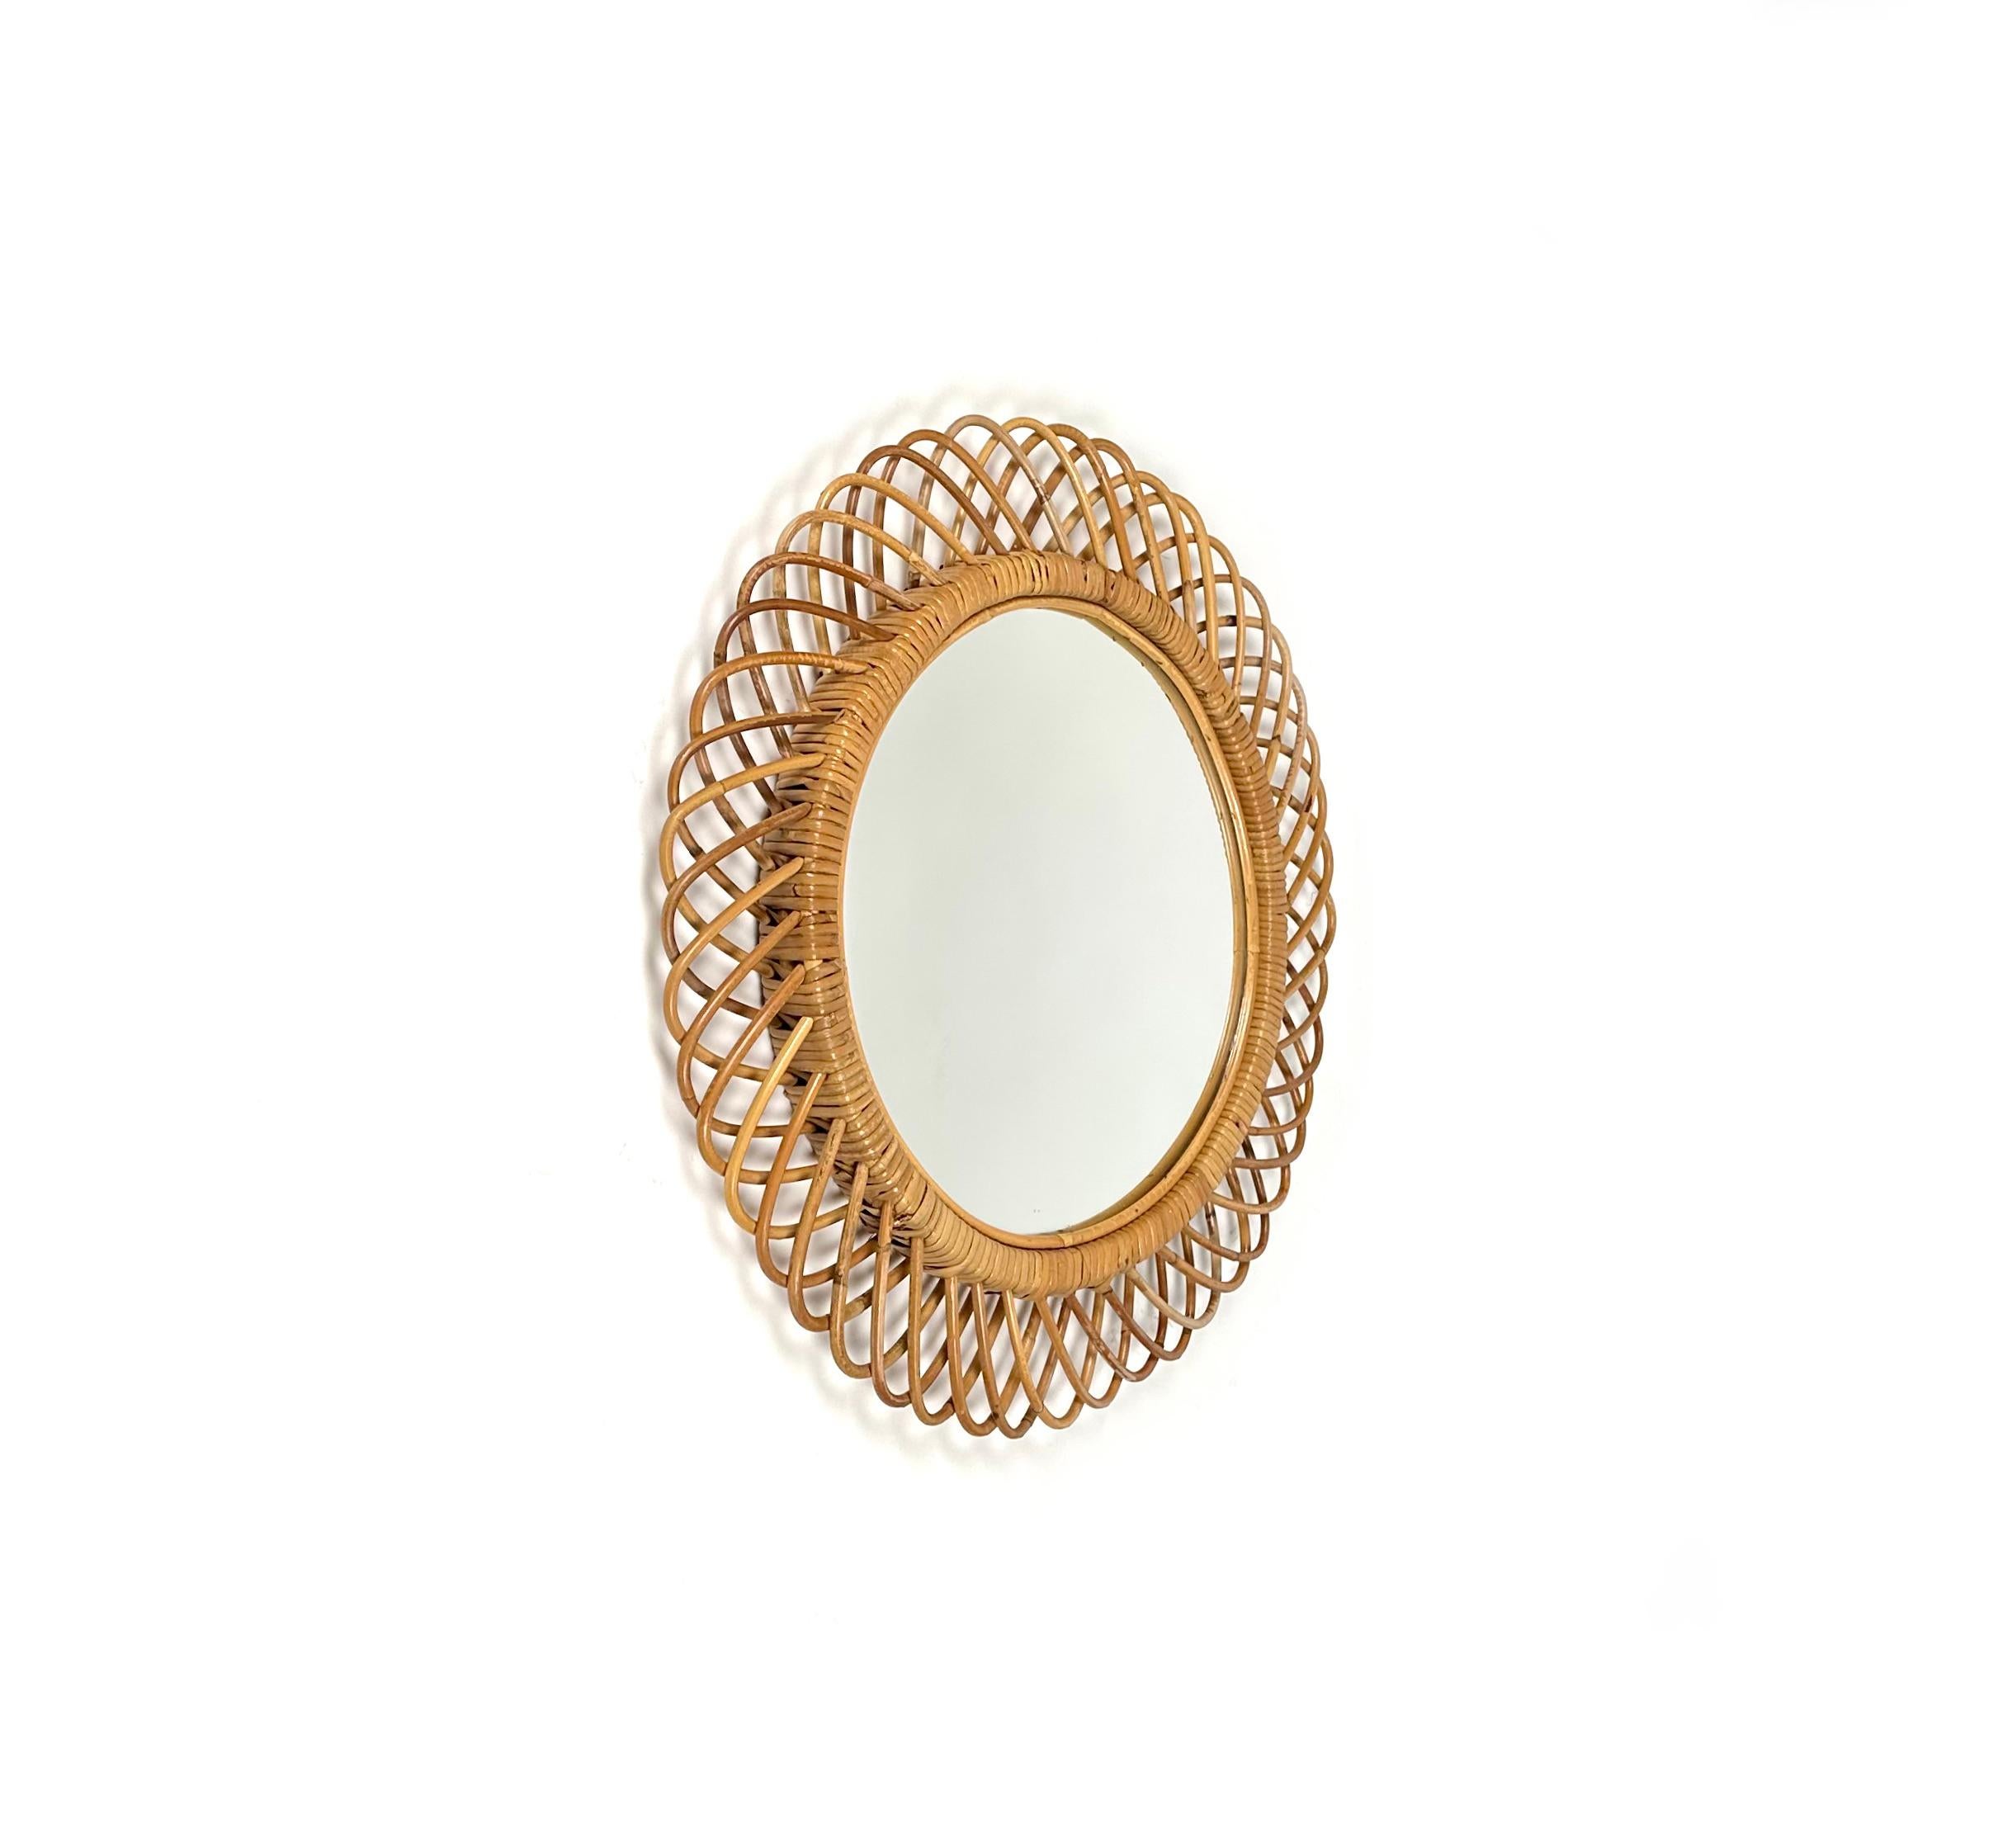 Beautiful round wall mirror in bamboo and rattan. 

A highly decorative mirror with undulated rattan frame. 

Made in Italy in the 1960s.